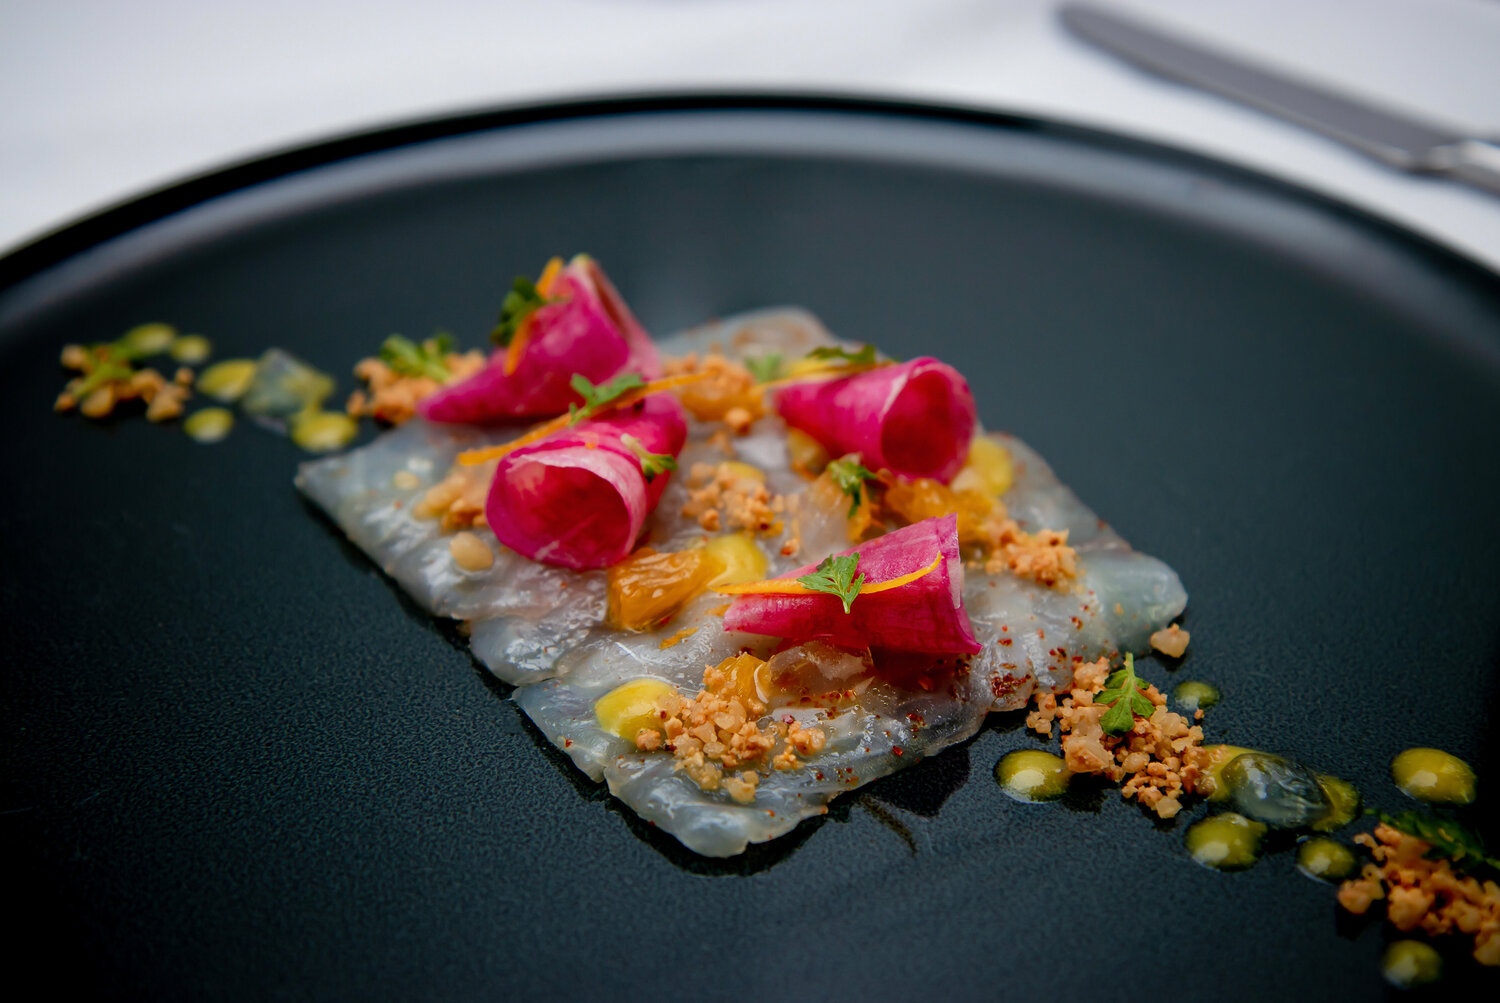 From the summer tasting menu: black sea bass with Marcona almond nougatine, radish, and citrus